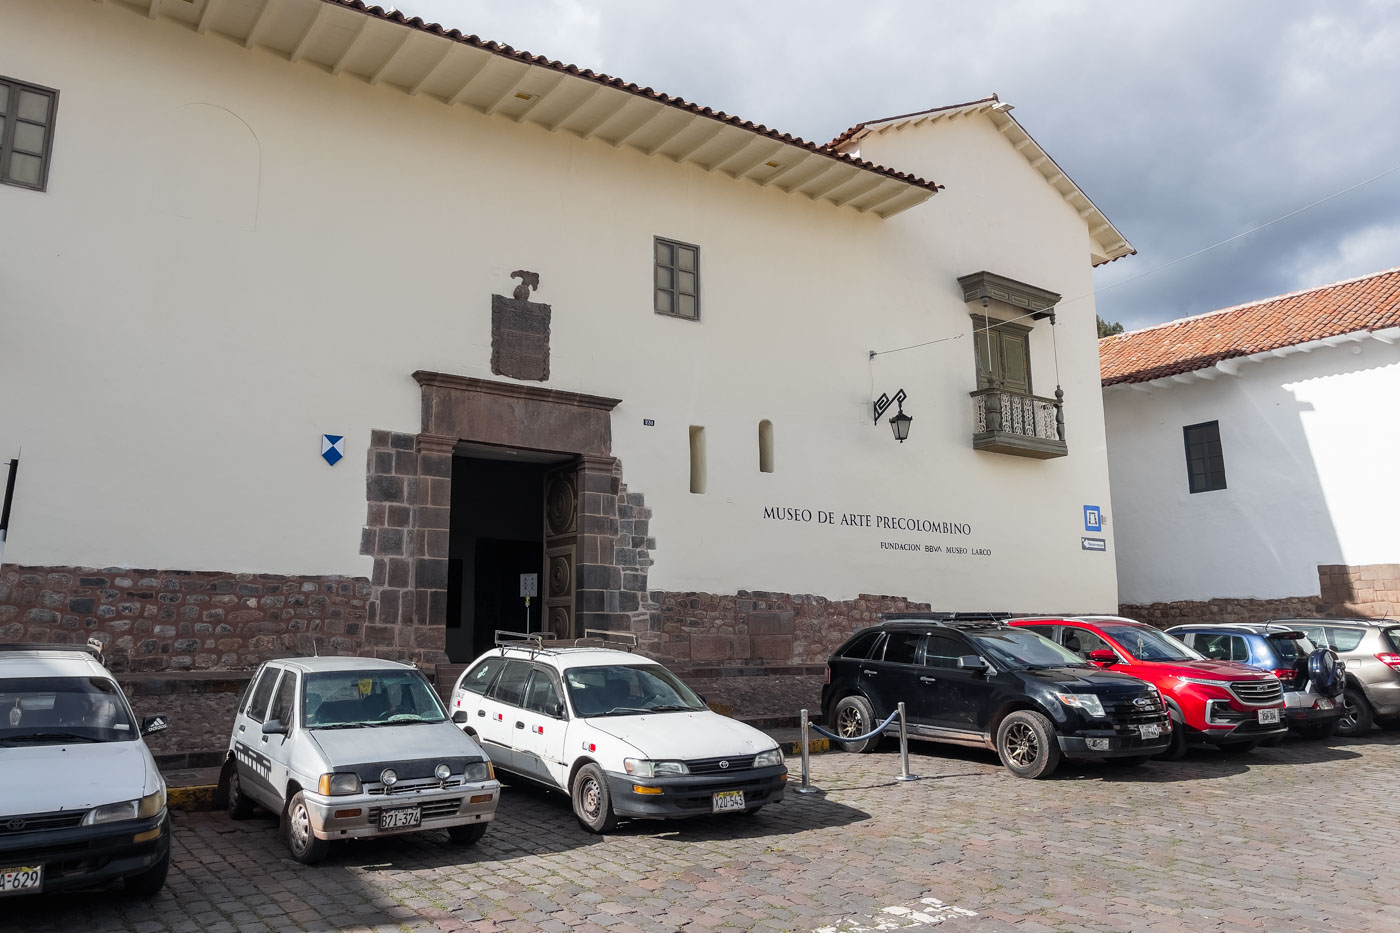 Cars parked outside the front of the Museo de Arte Precolombino in Cusco.